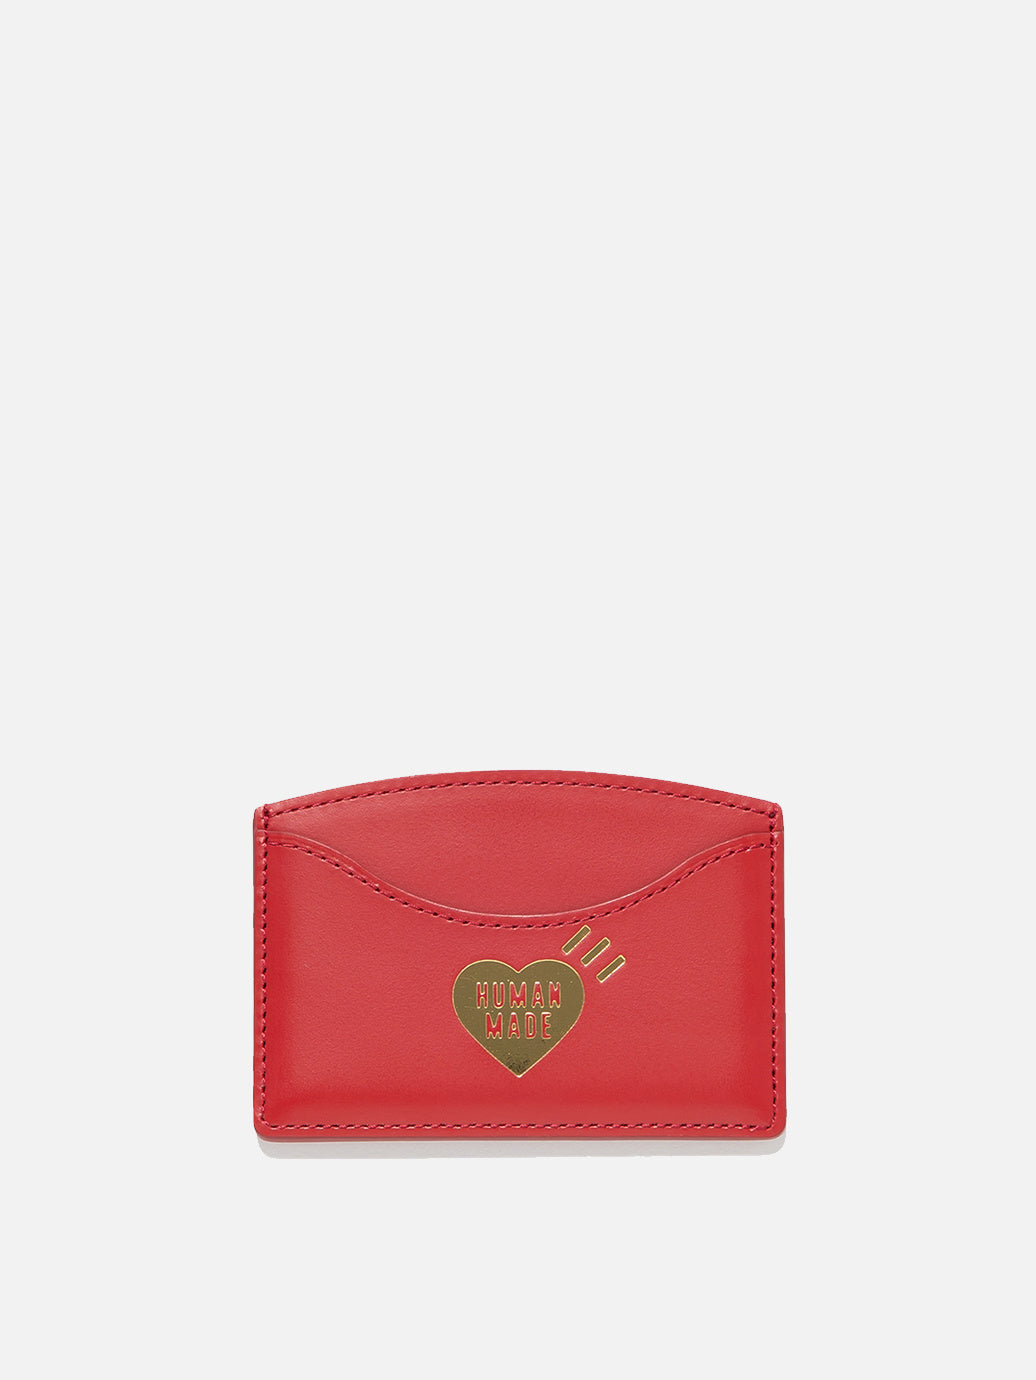 HUMAN MADE HEART LEATHER PASS CASE RED (HM19GD002)